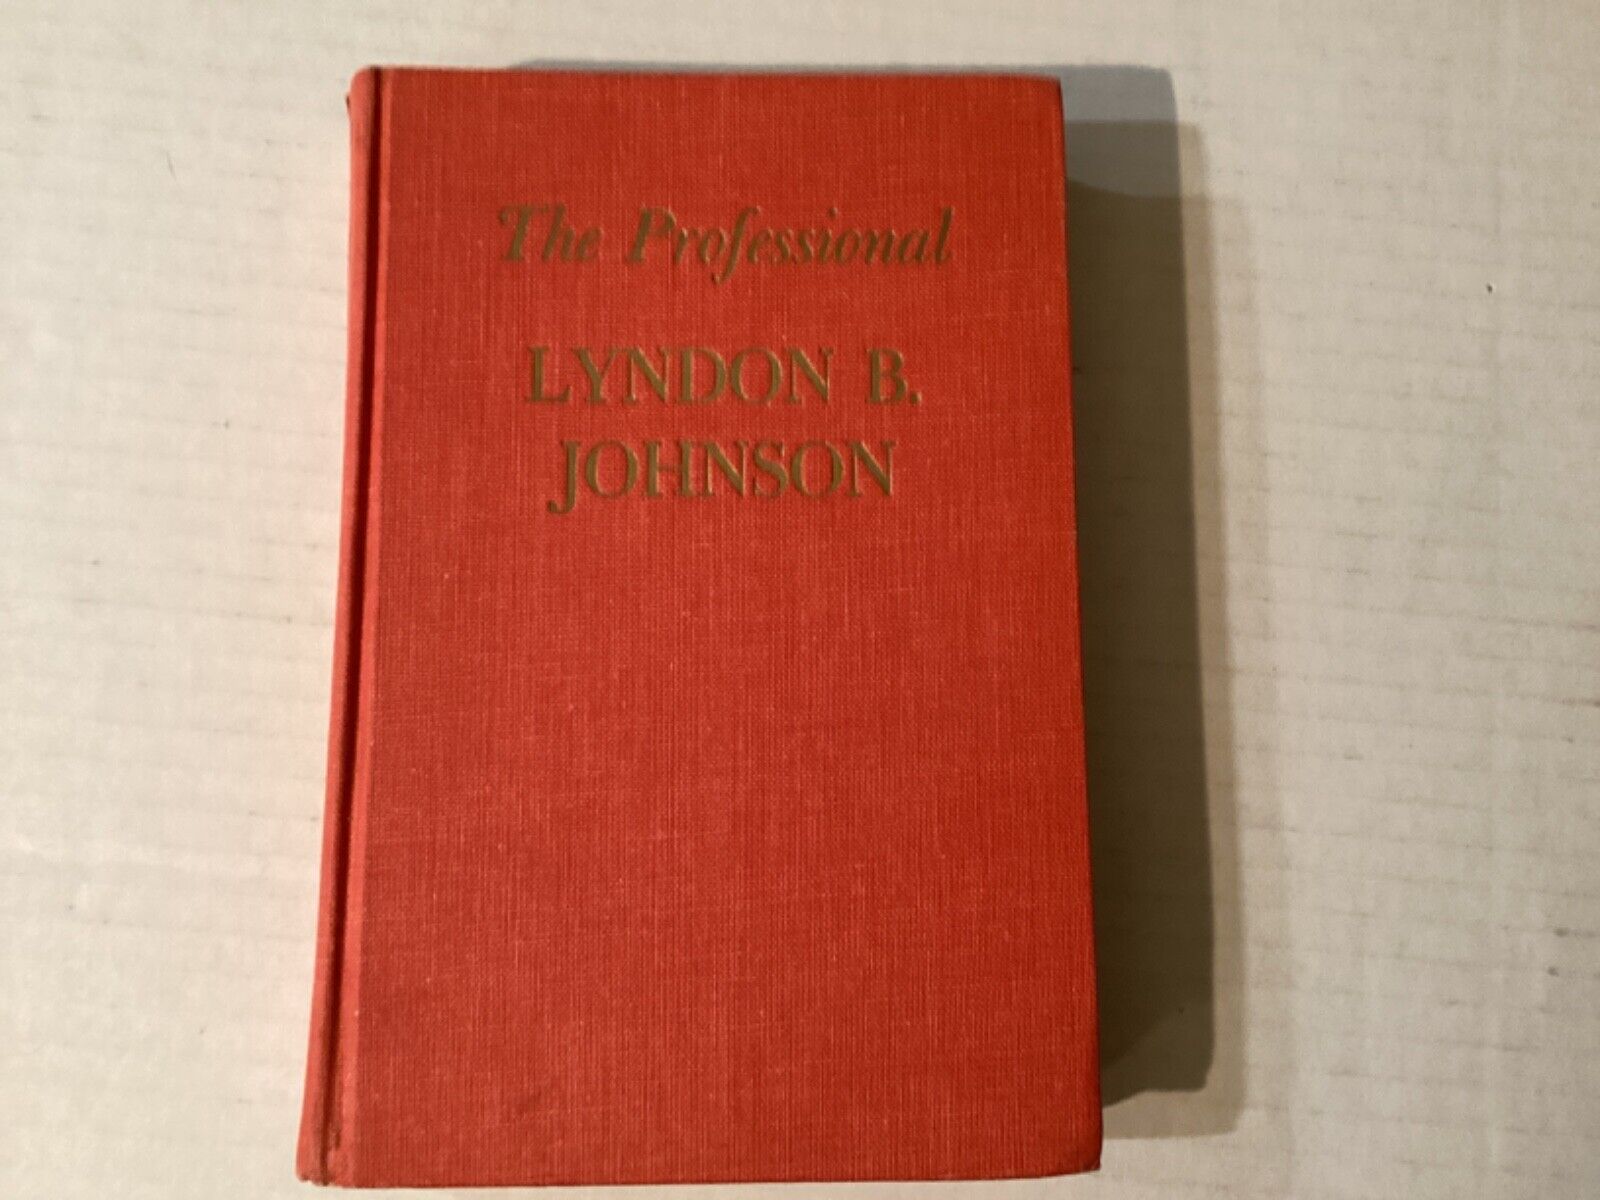 THE PROFESSIONAL HC BOOK AUTOGRAPHED BY LYNDON B. JOHNSON